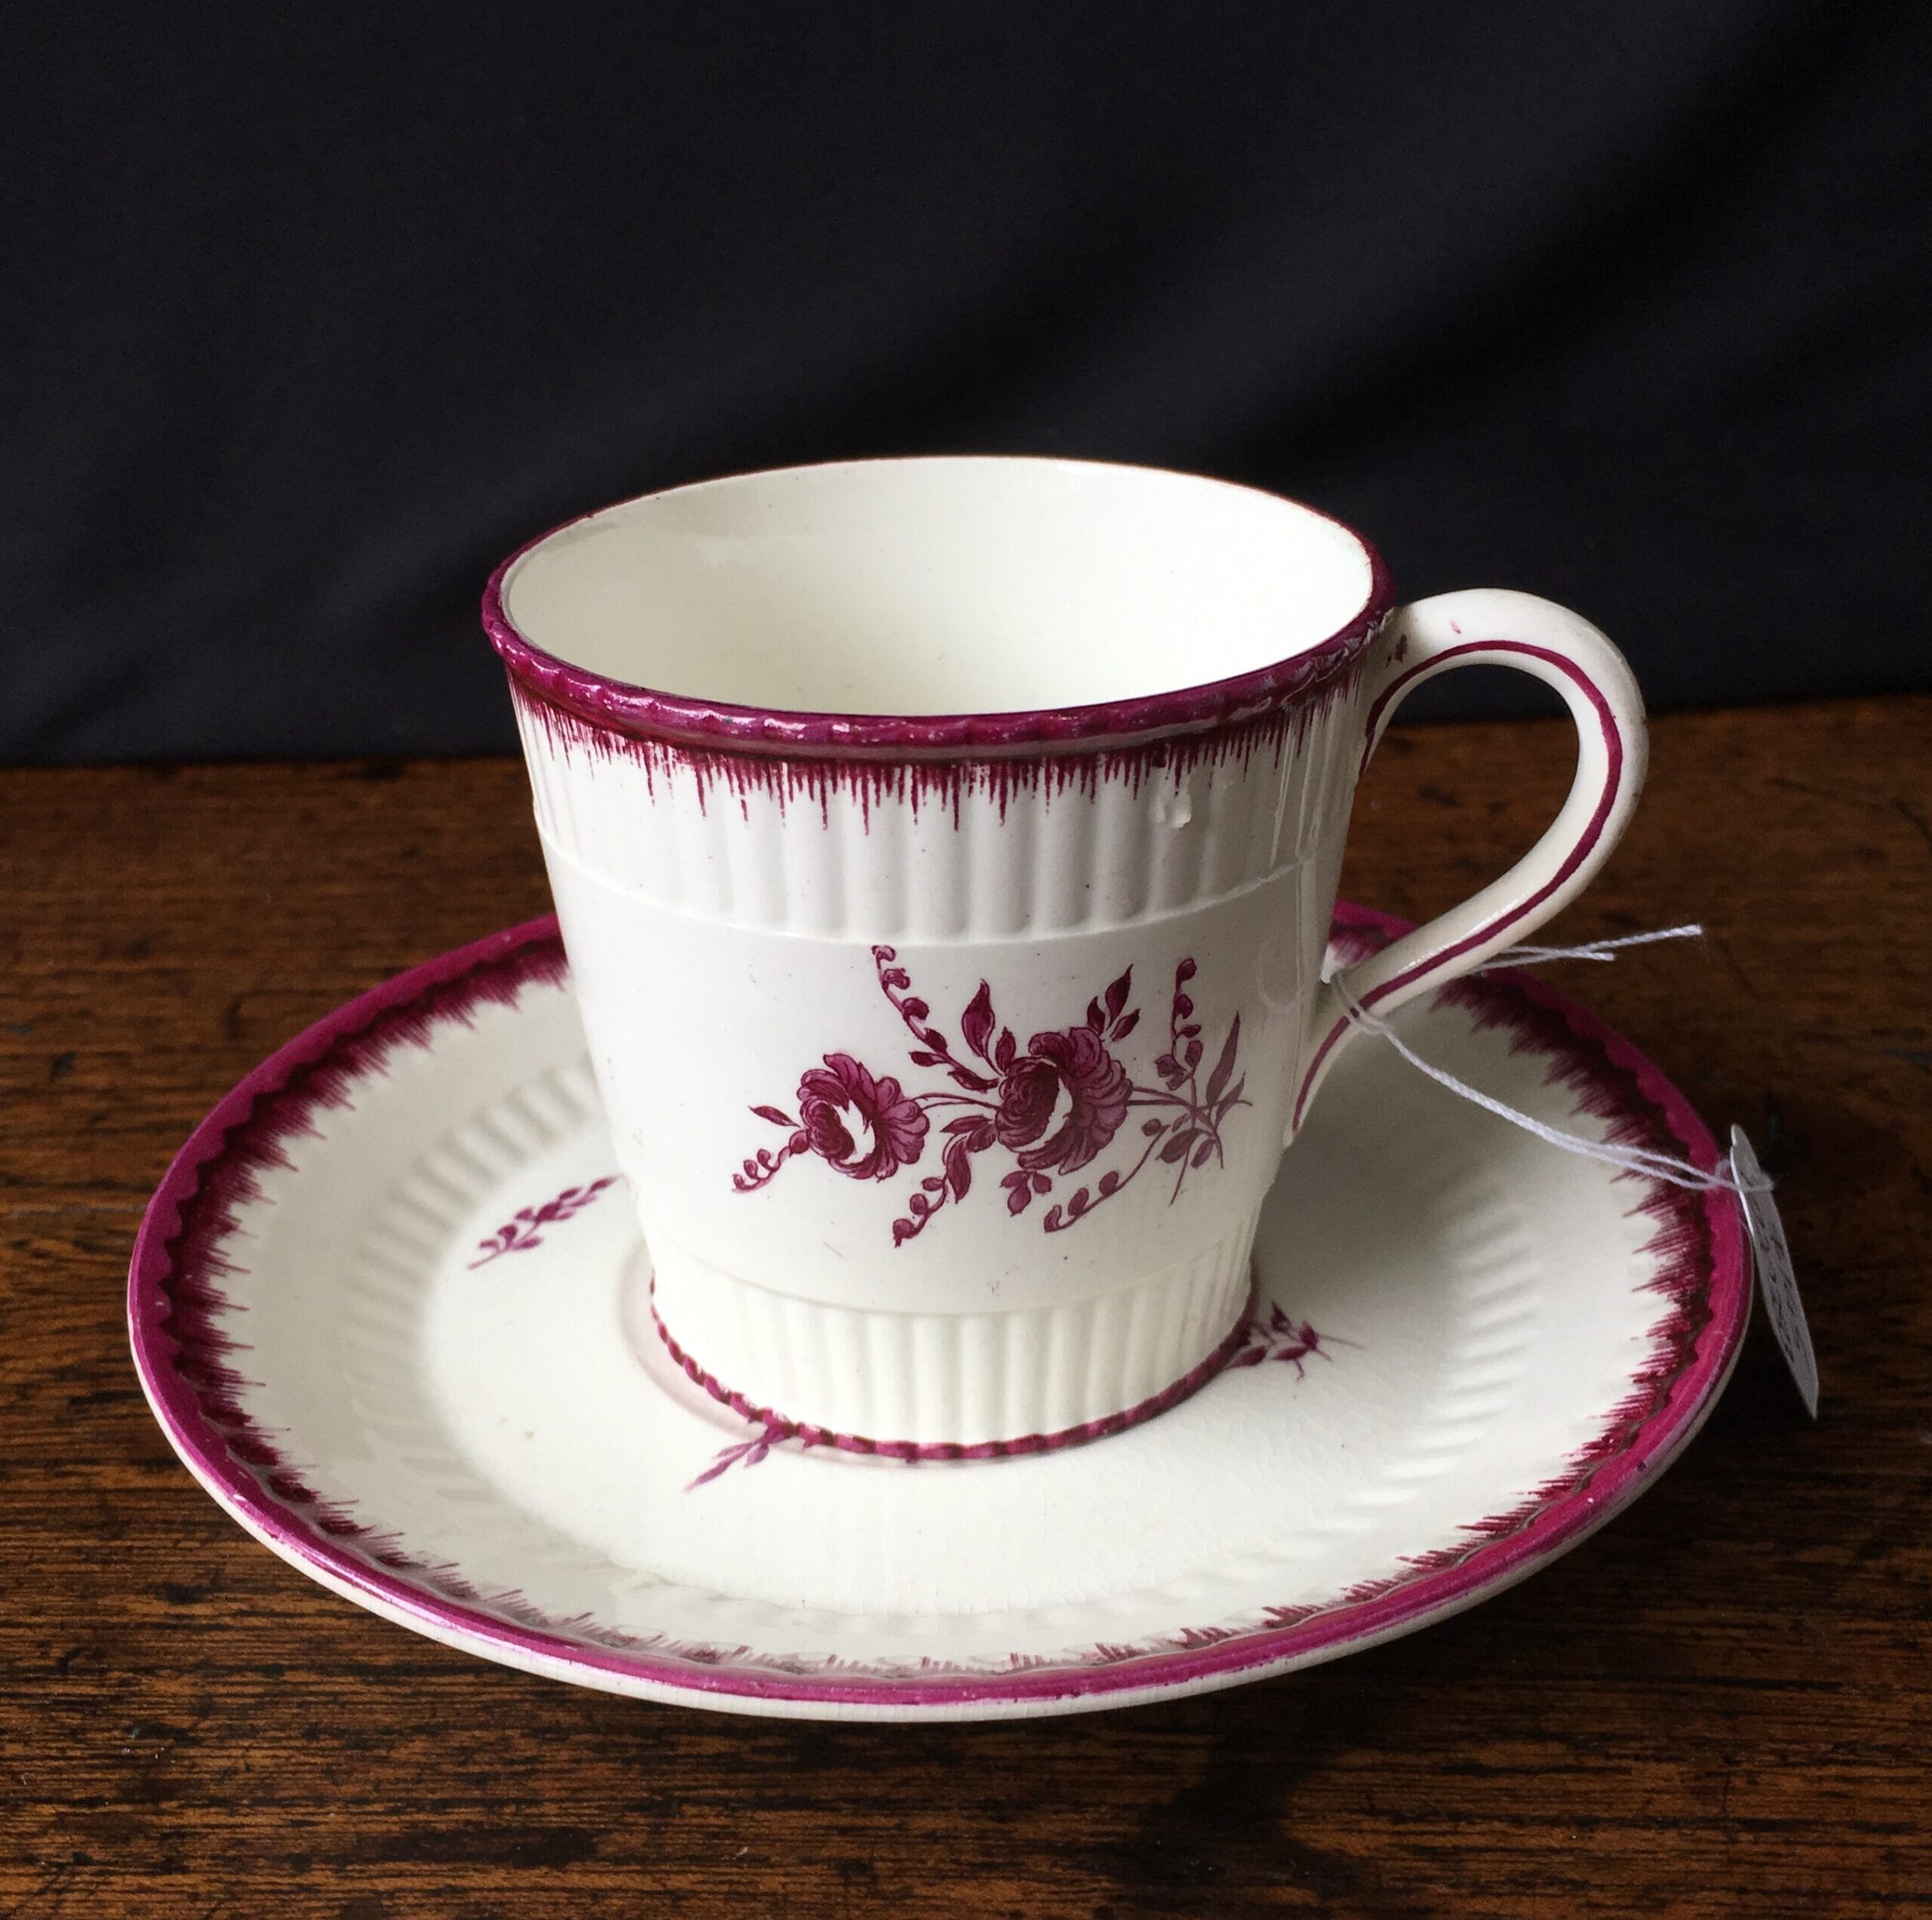 Wedgwood cup & saucer, puce prints in the 18th century style, 1872-0